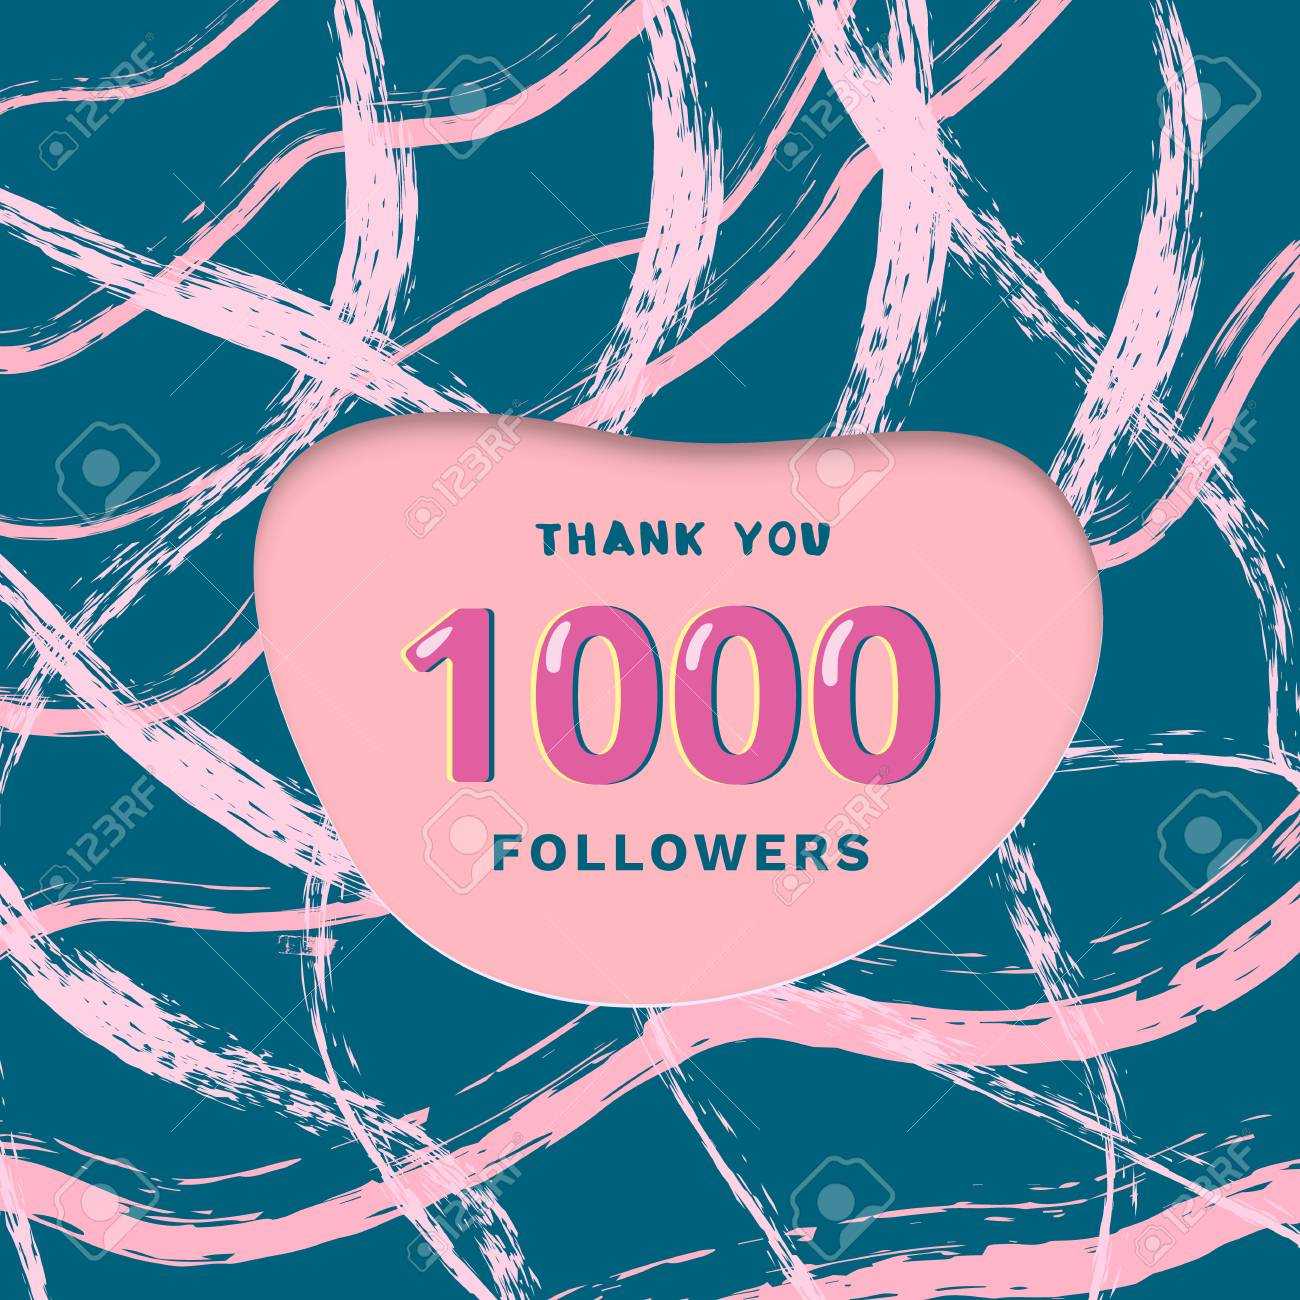 1000 Followers Thank You Card. Cover With Papercut Shape Throughout Med Card Template